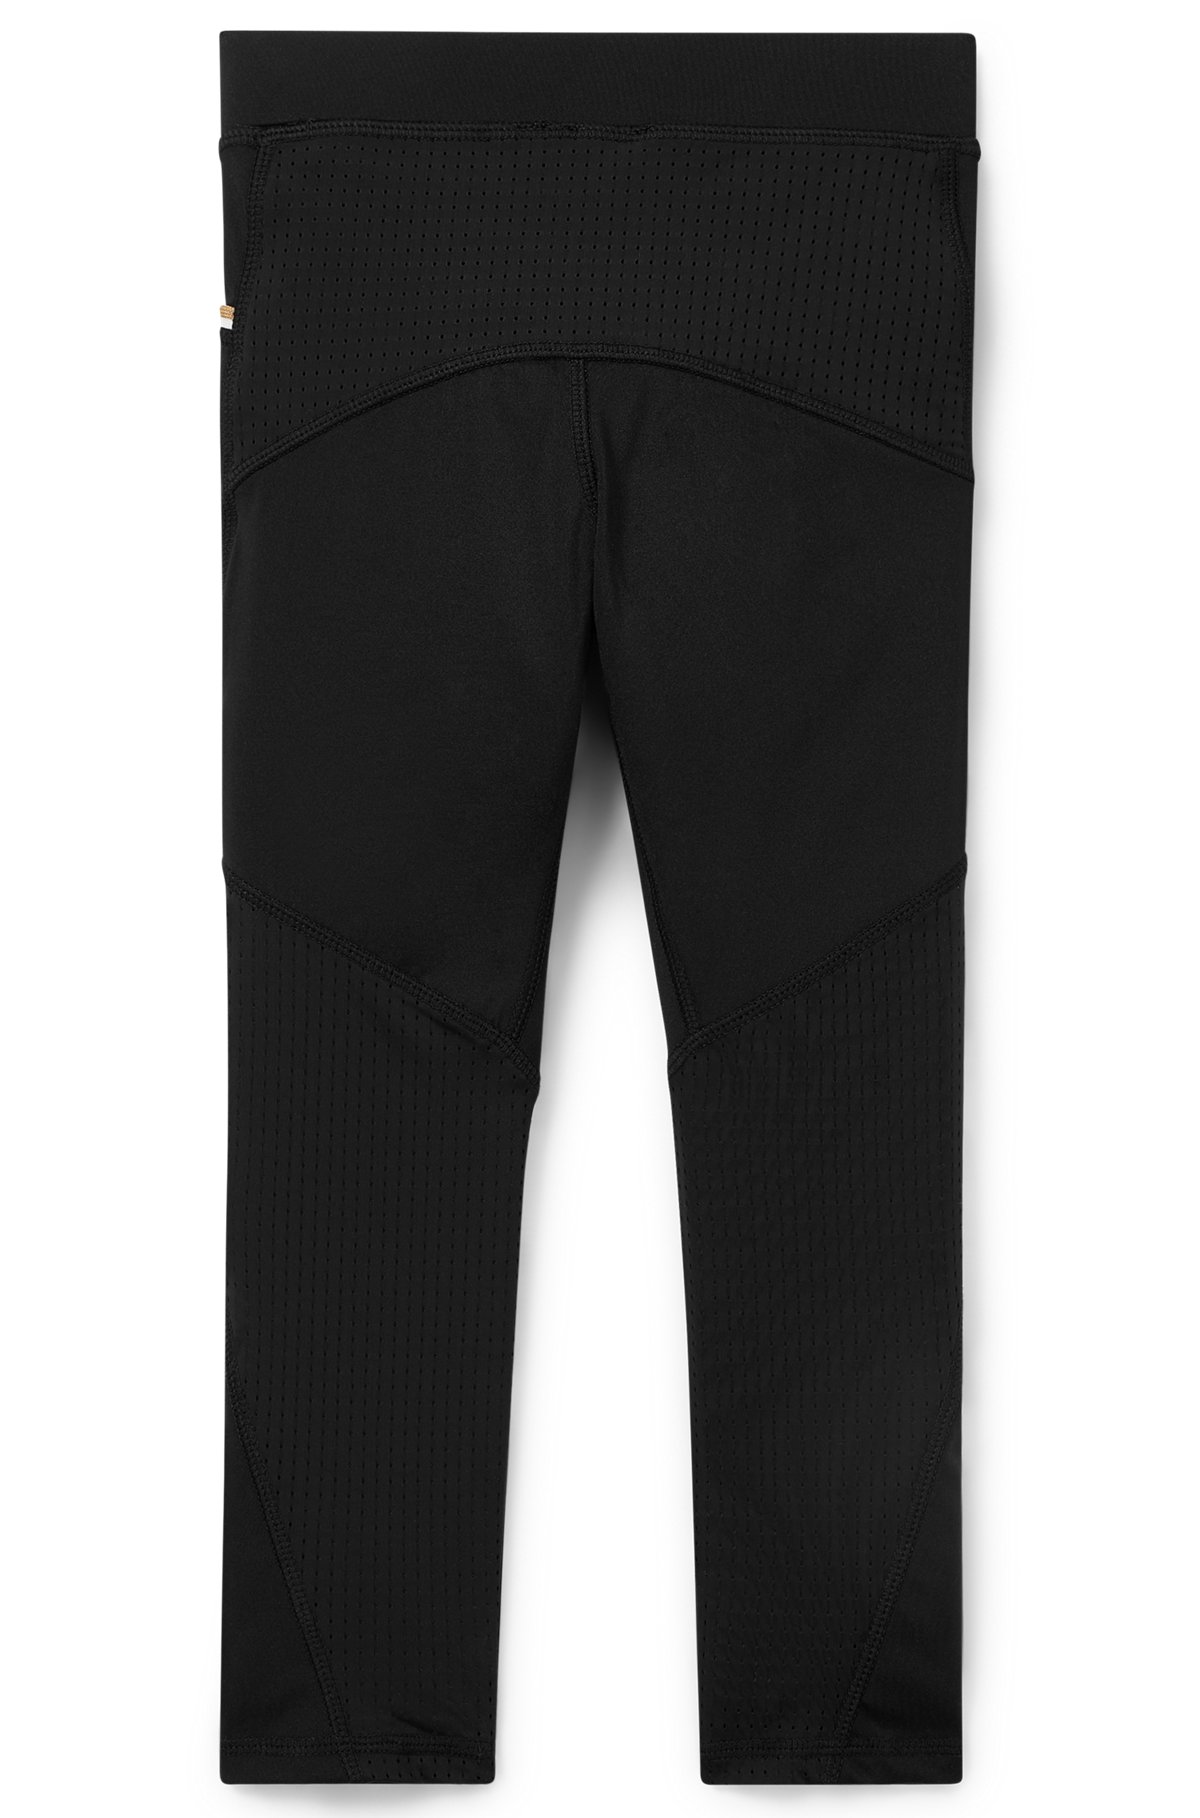 Kids' leggings in mixed materials with contrast logo, Black